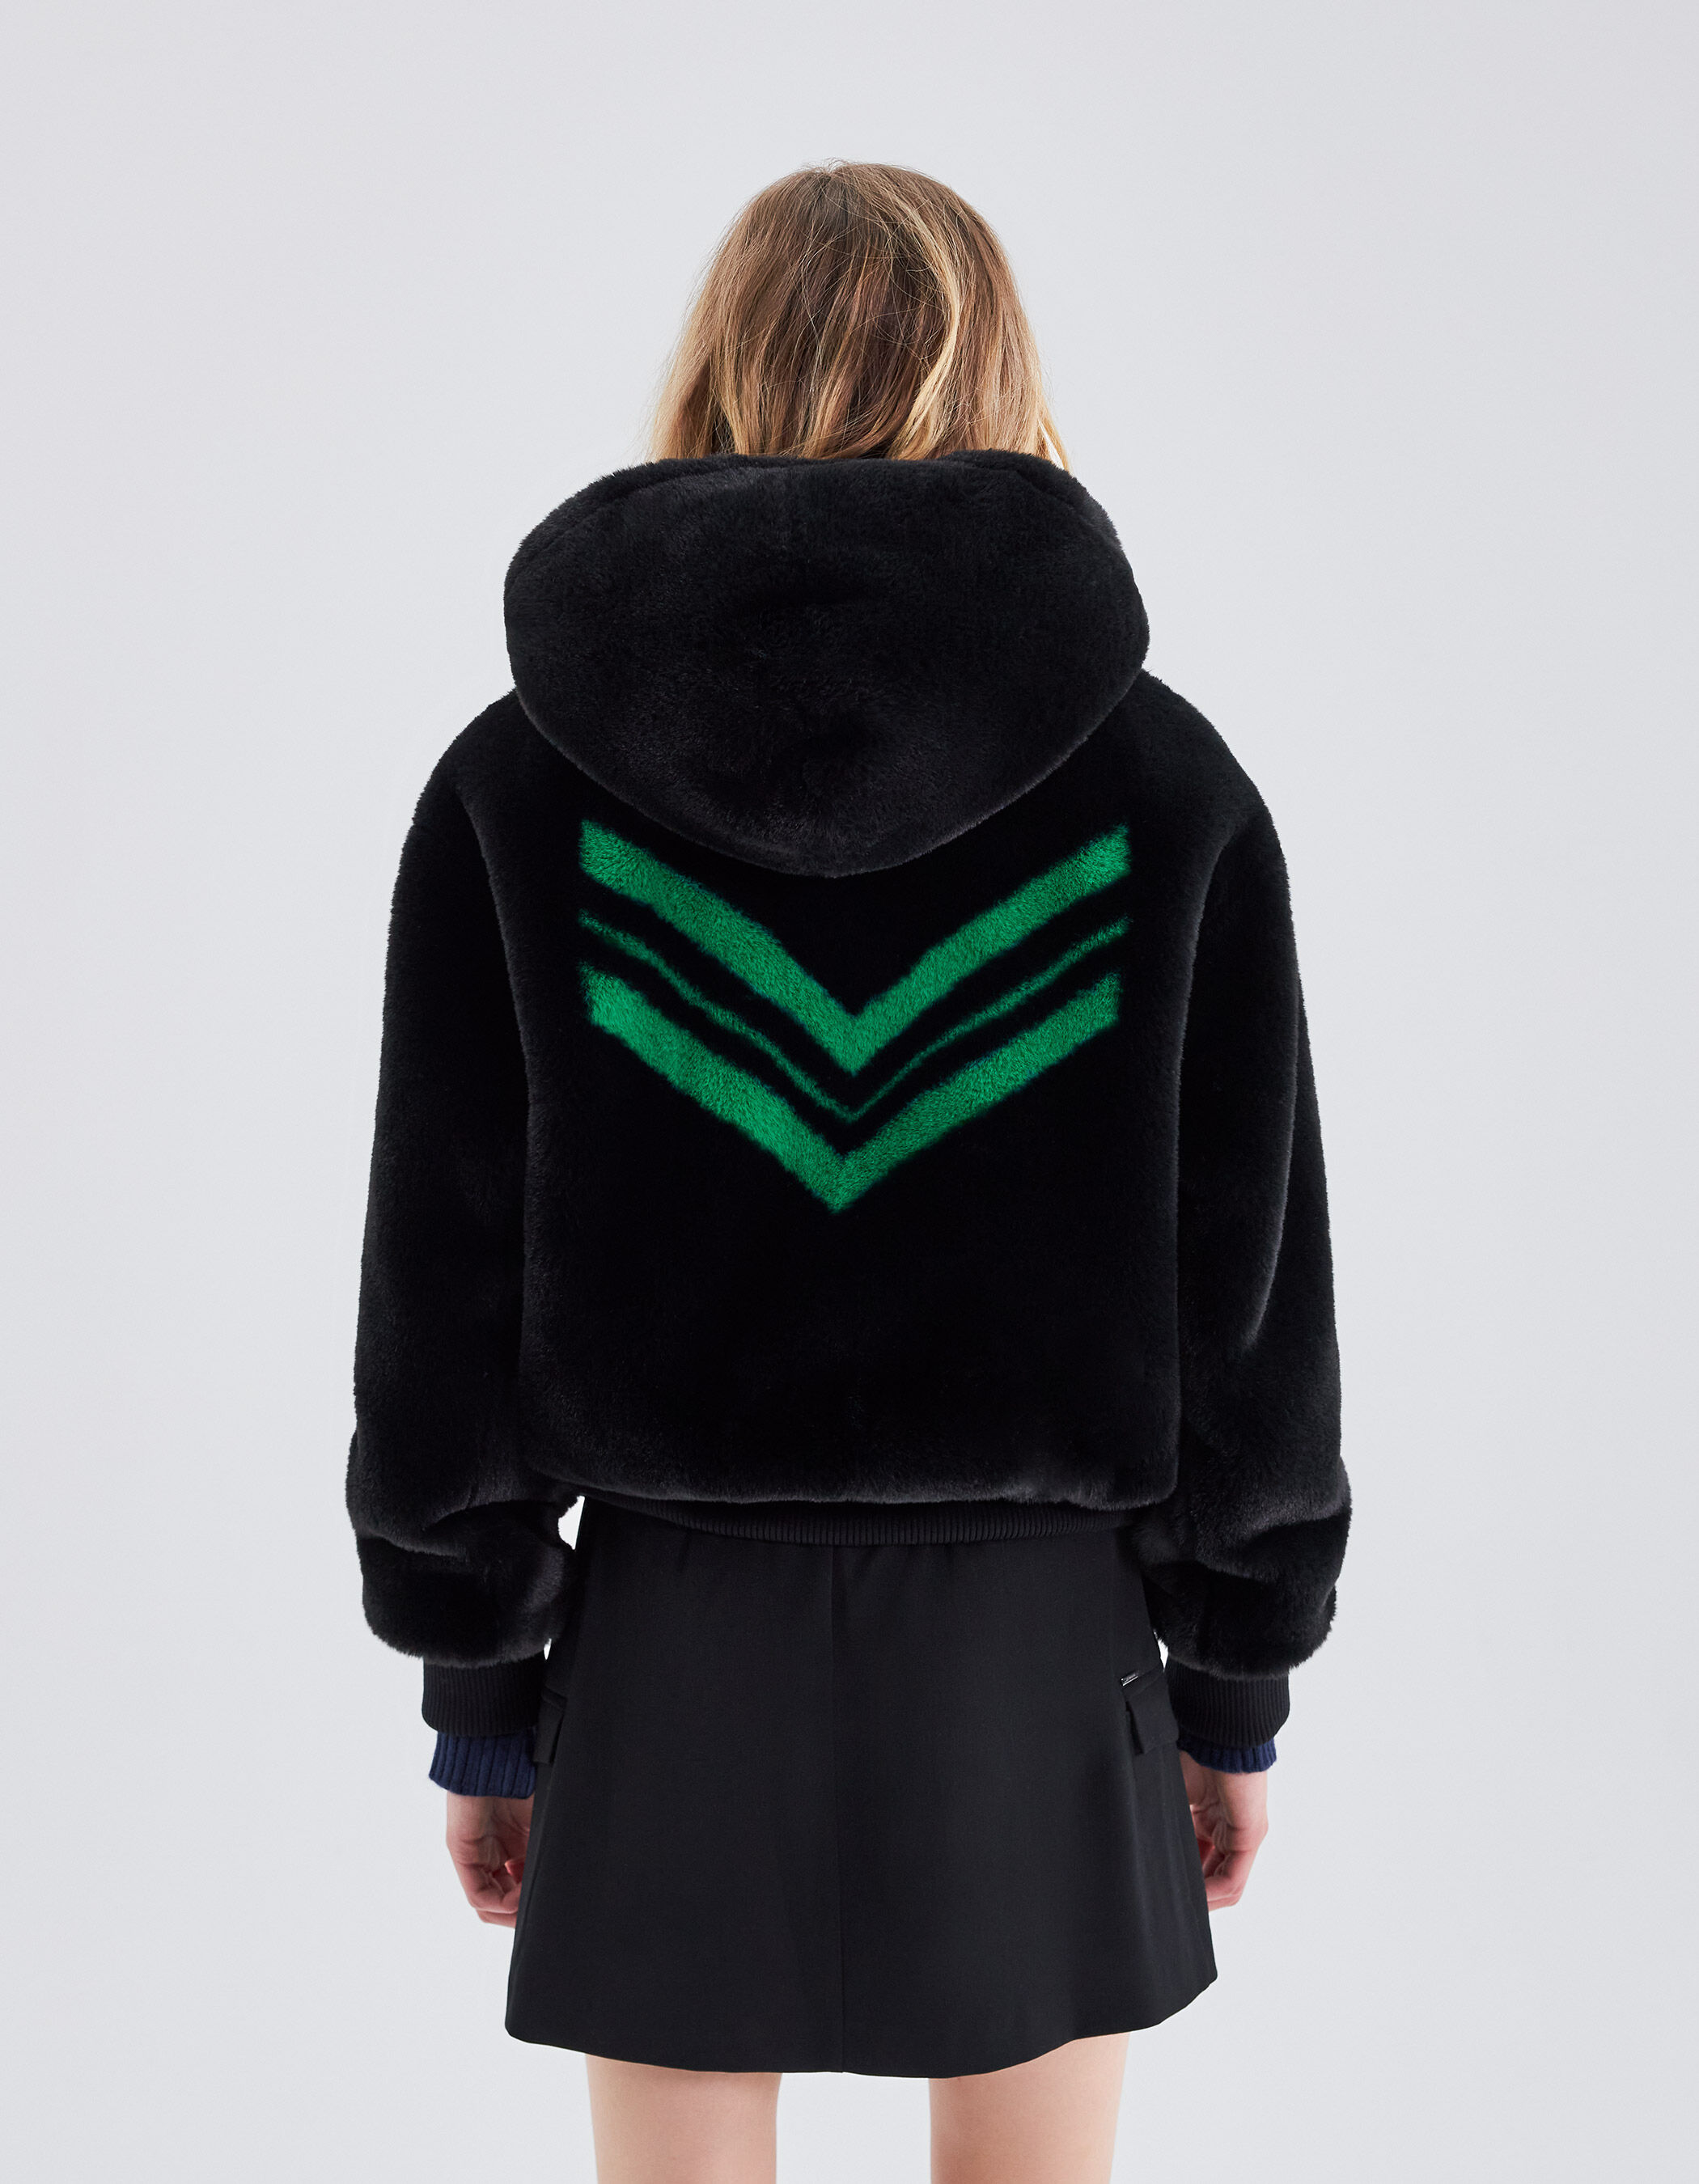 Women's black hooded jacket with green chevrons on back